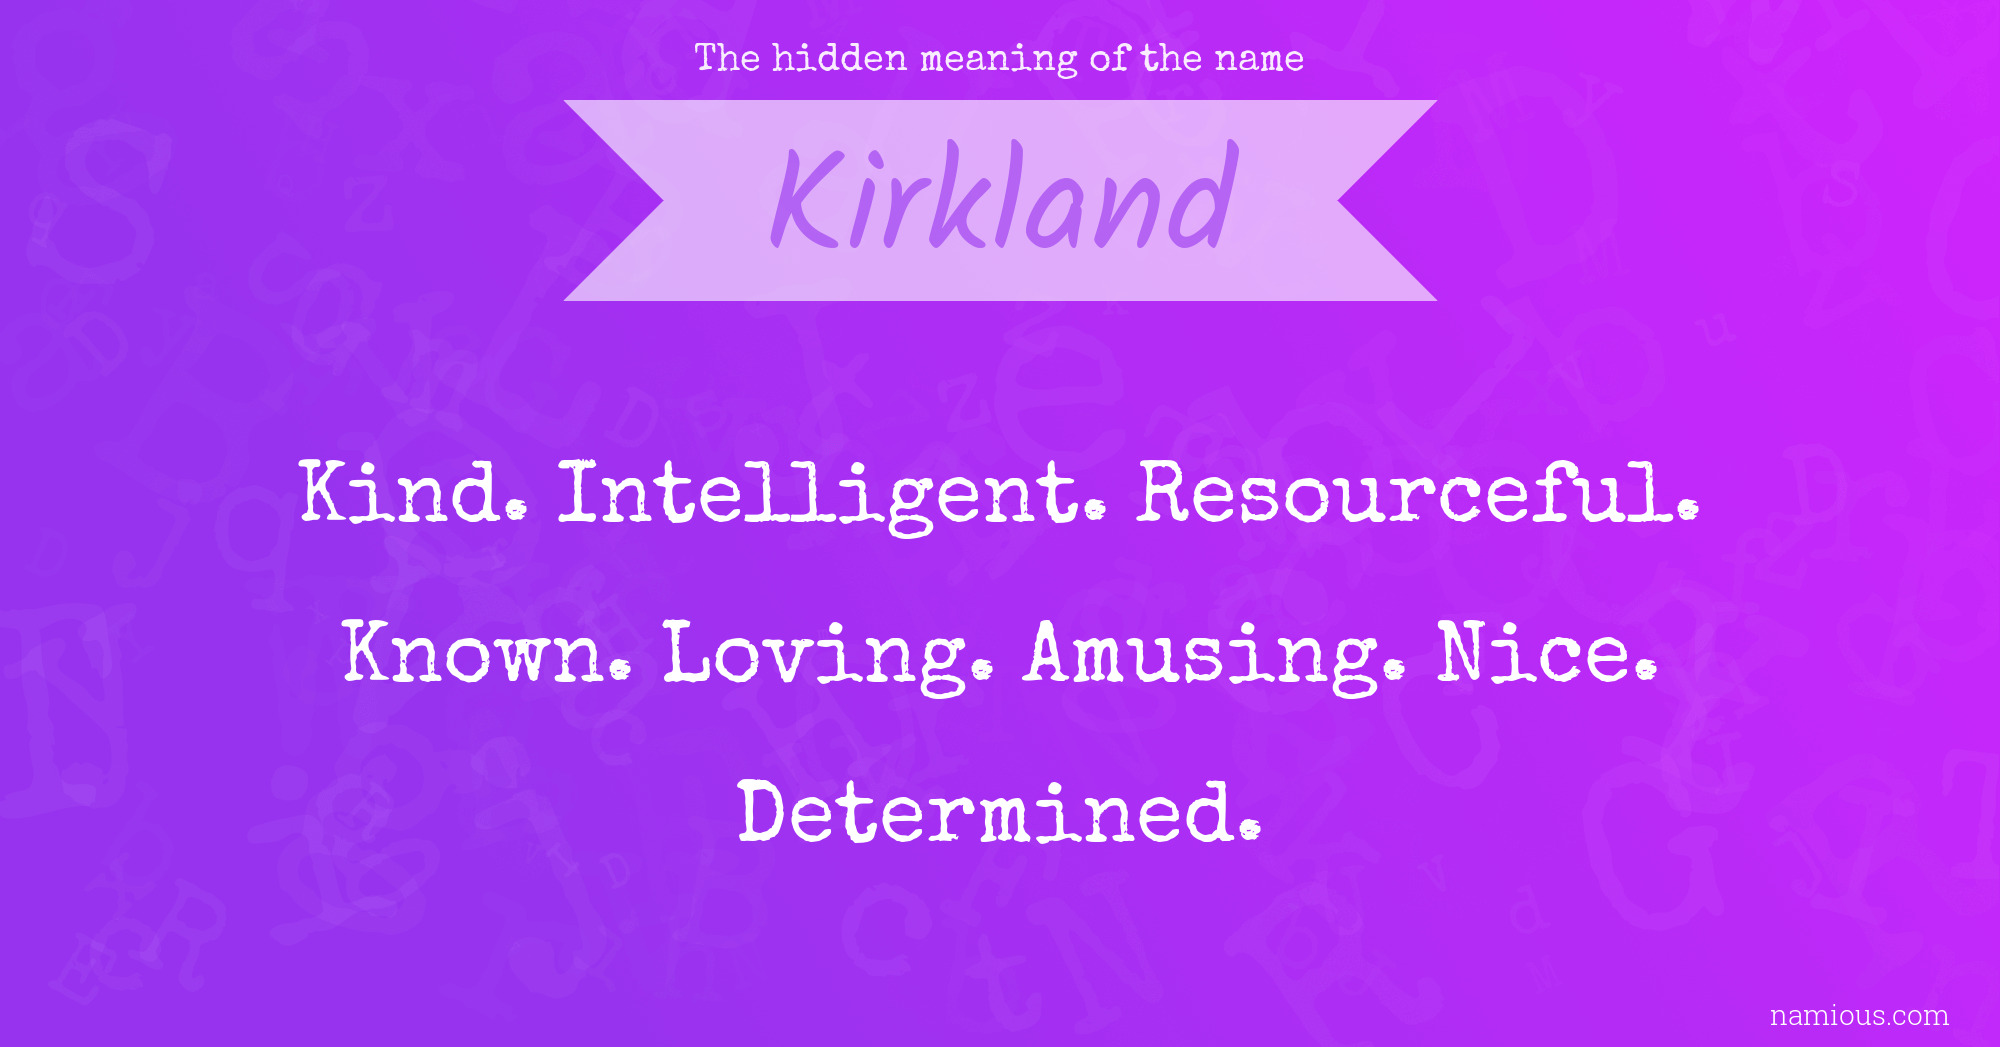 The hidden meaning of the name Kirkland